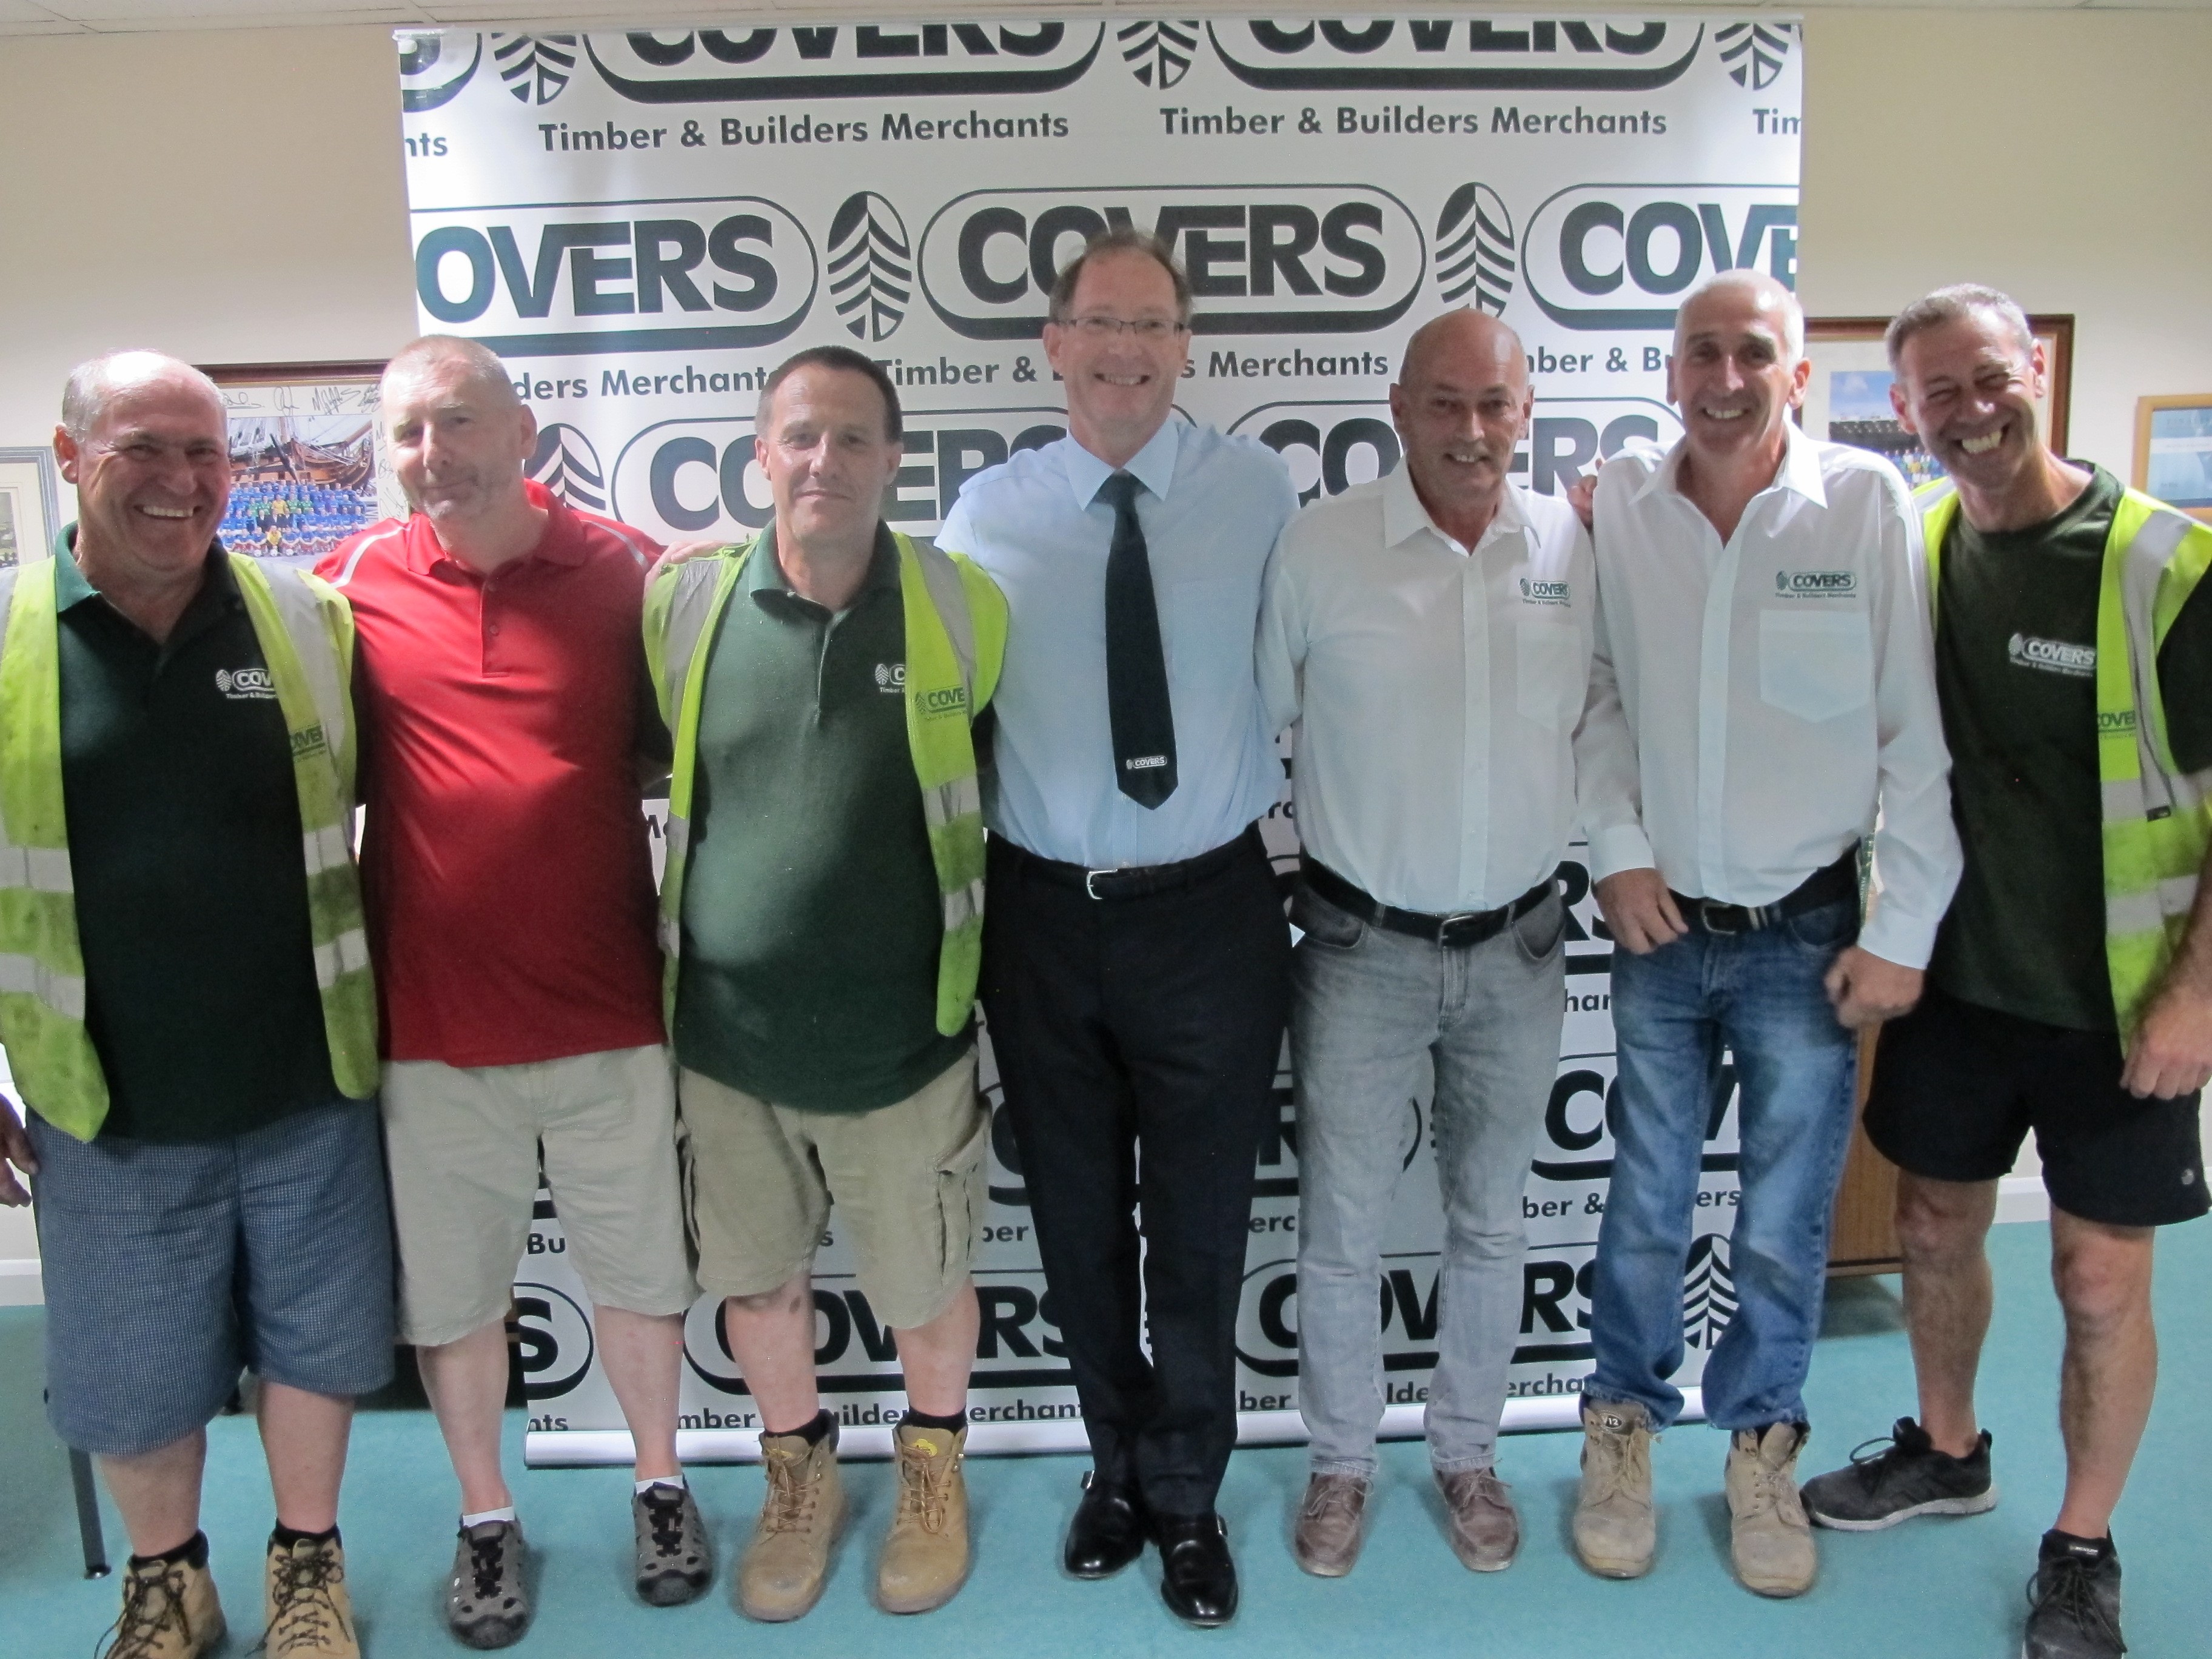 Covers celebrates 260 years of service at special event